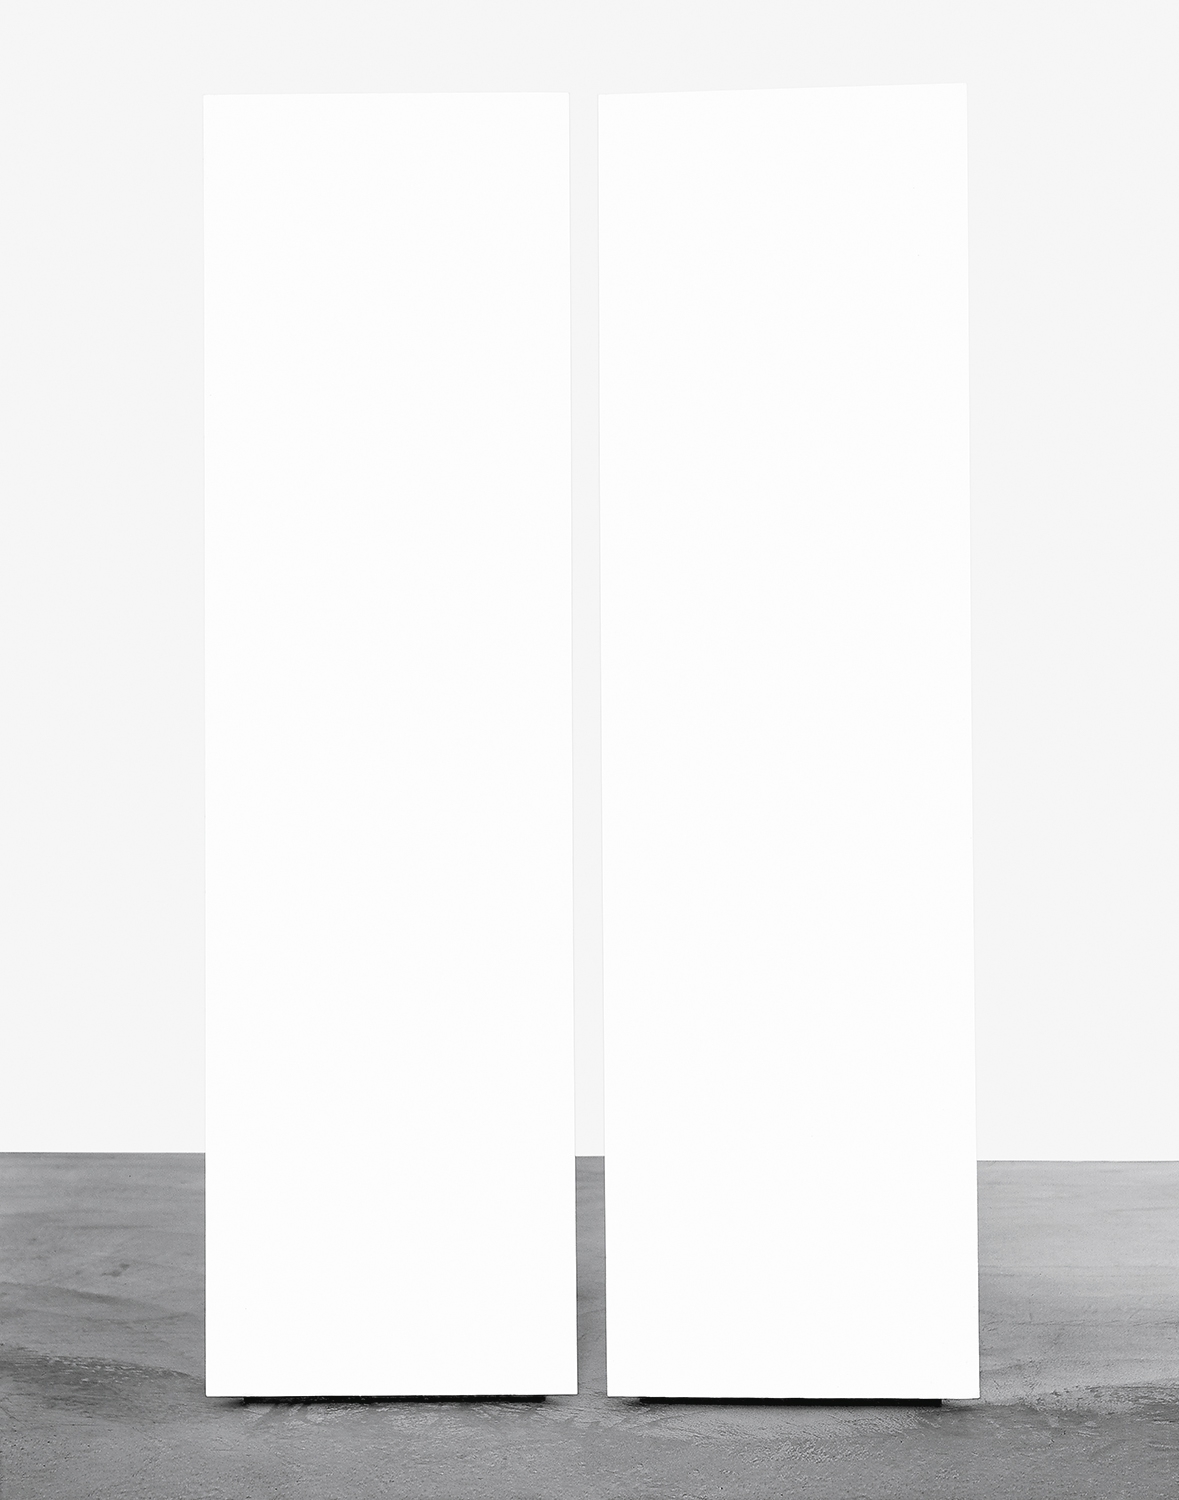 Mary Corse, Two Triangular Columns, 1965. Wood, joint compound, acrylic. 